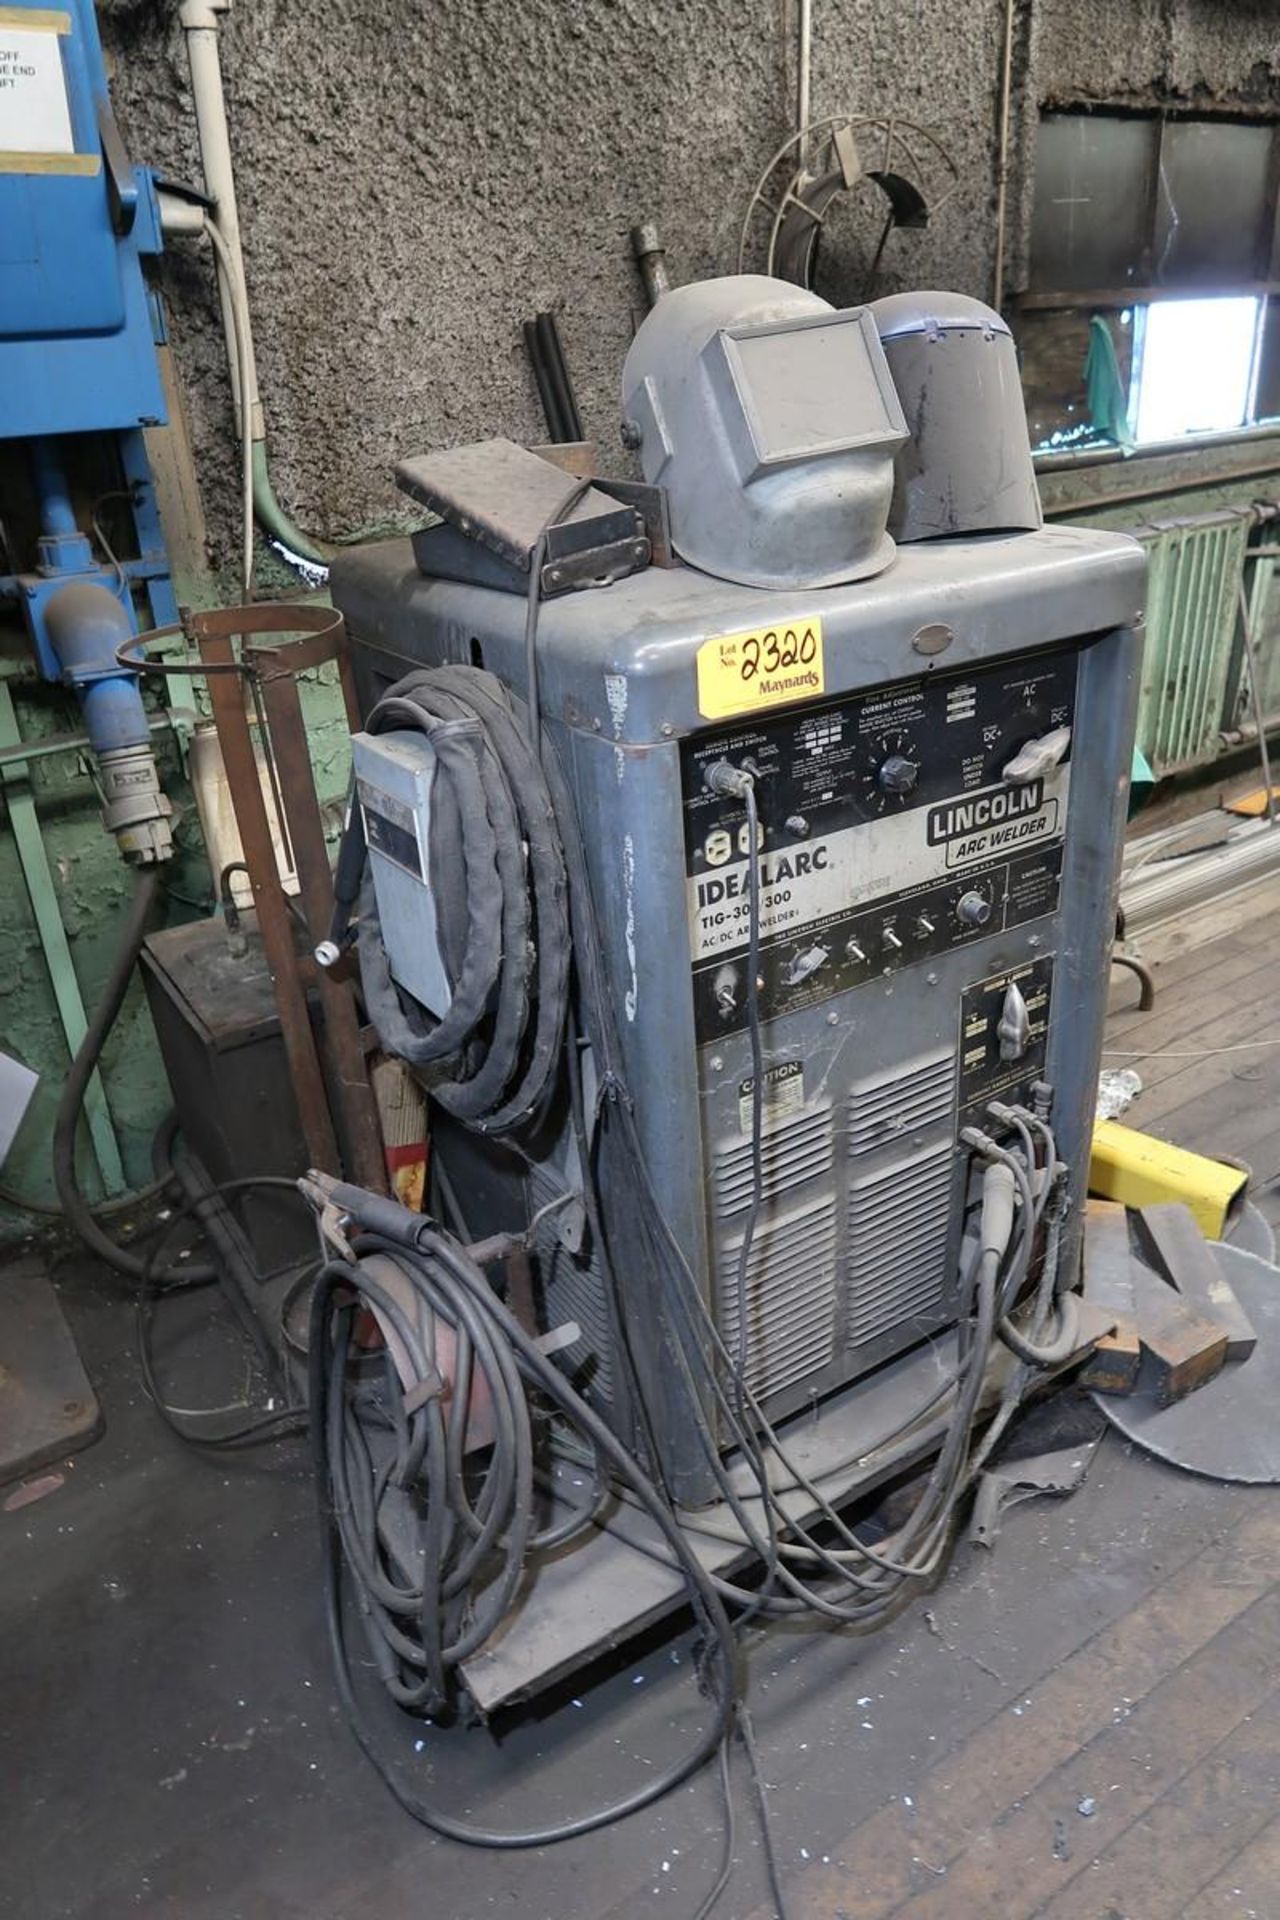 Lincoln Electric Idealarc TIG-300/300 300A AC/DC Arc Welding Power Source